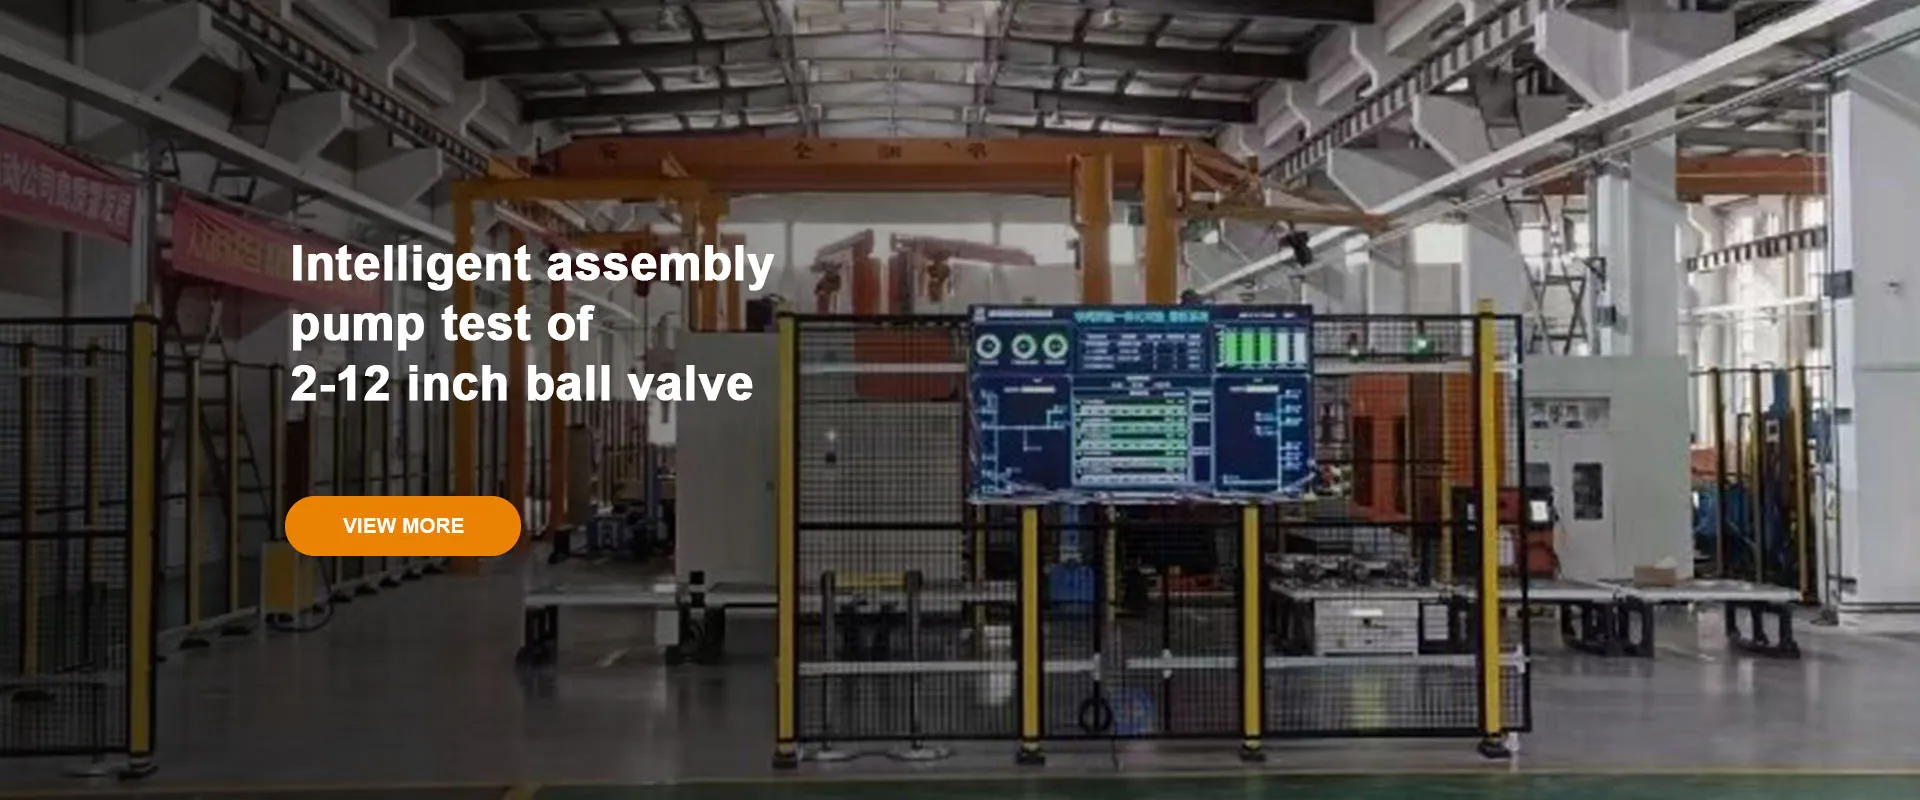 Automated Valve Assembly And Testing Machine